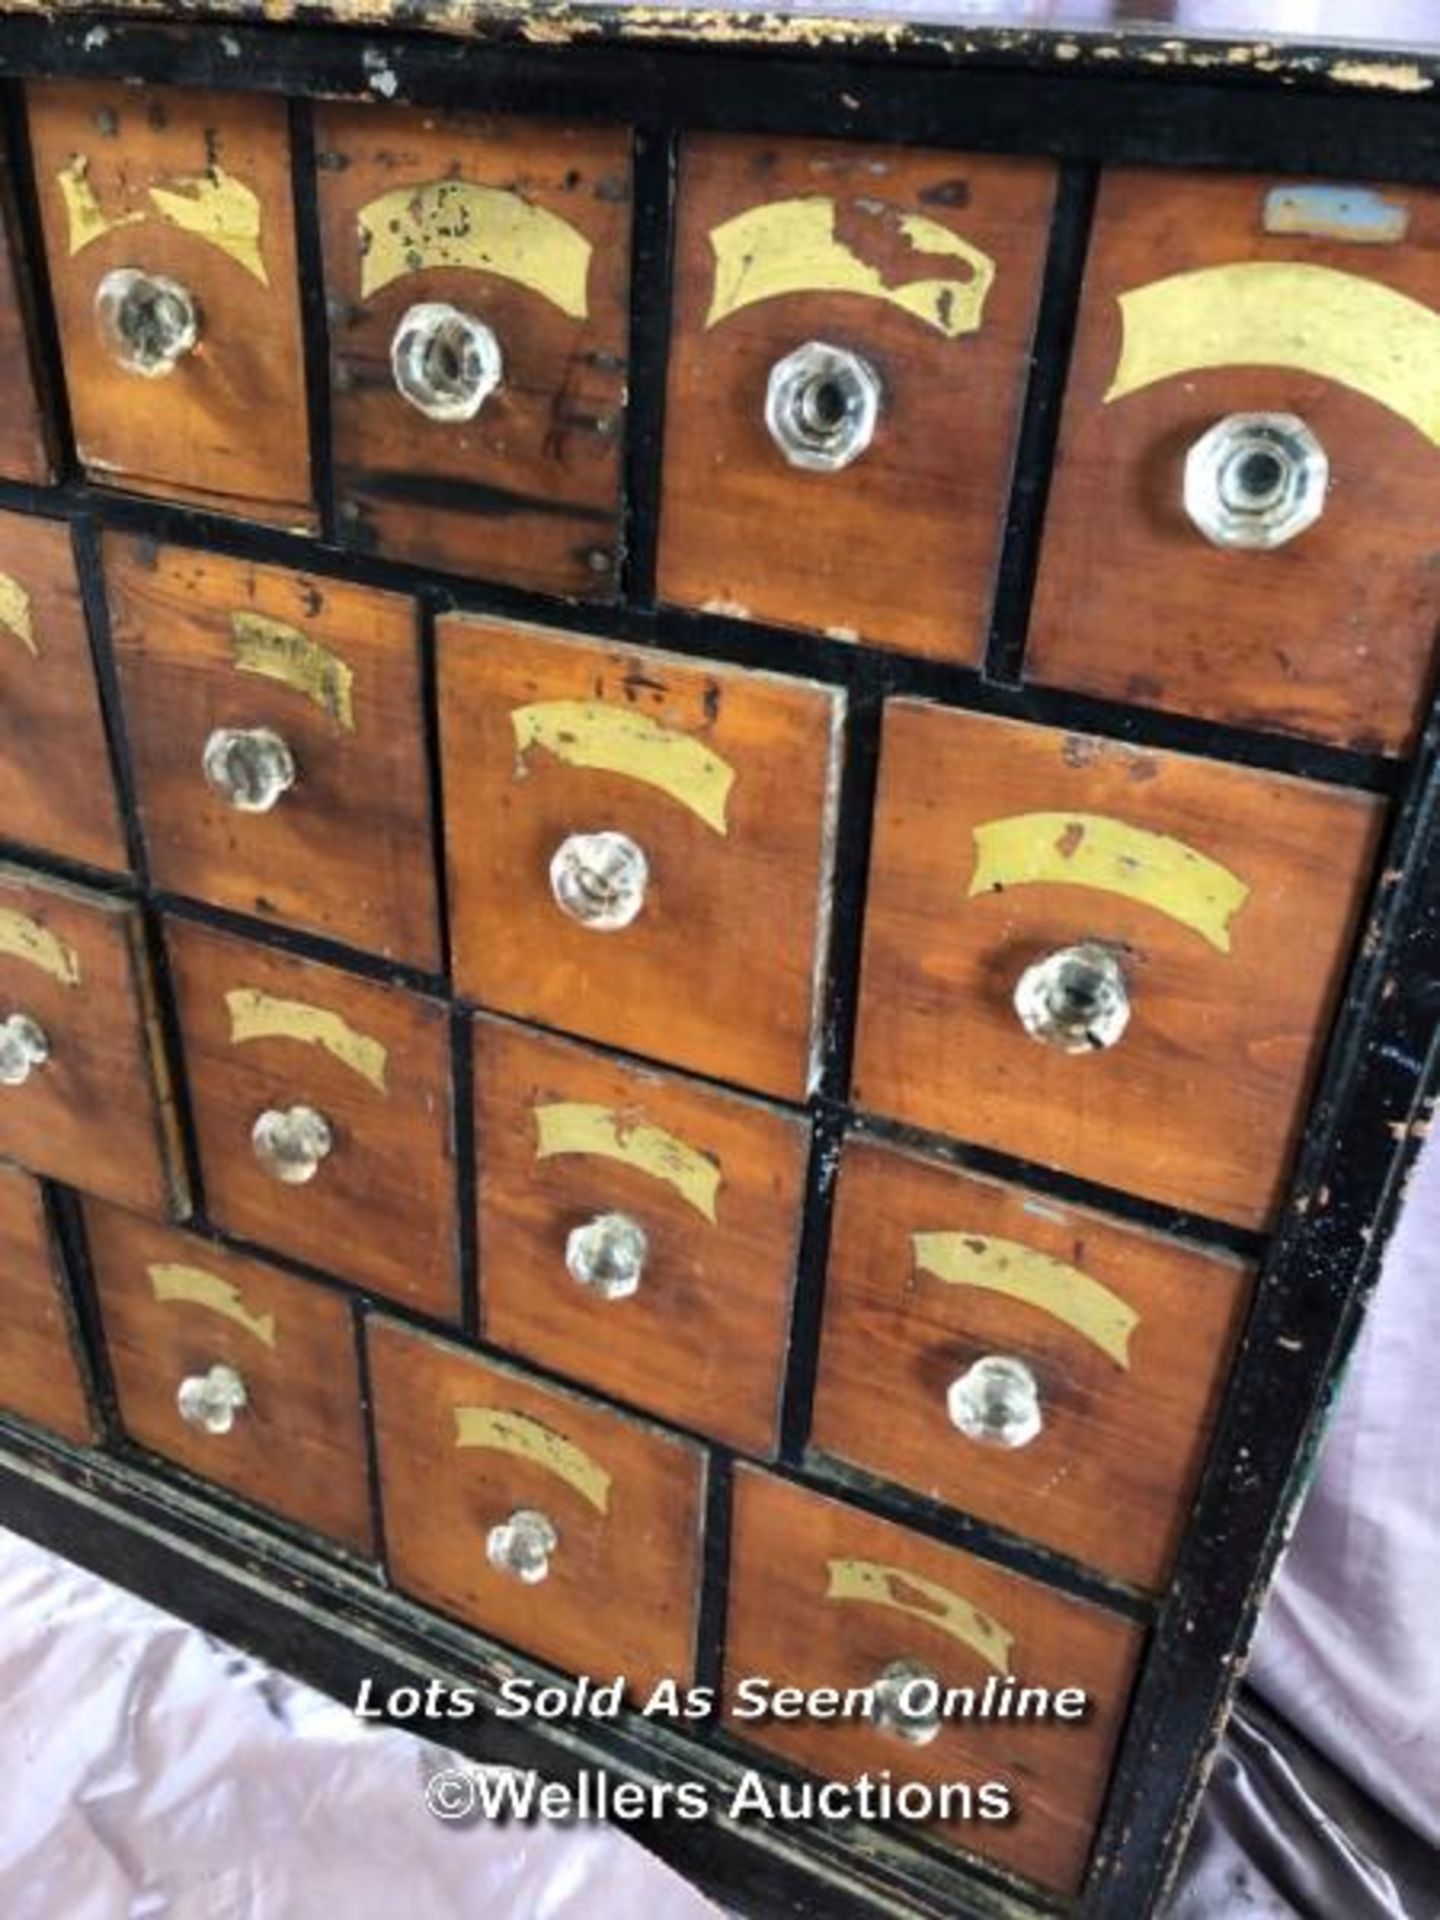 LARGE OAK APOTHECARY DRESSER WITH FIFTY DRAWERS, 208 X 26 X 89CM - Image 3 of 6